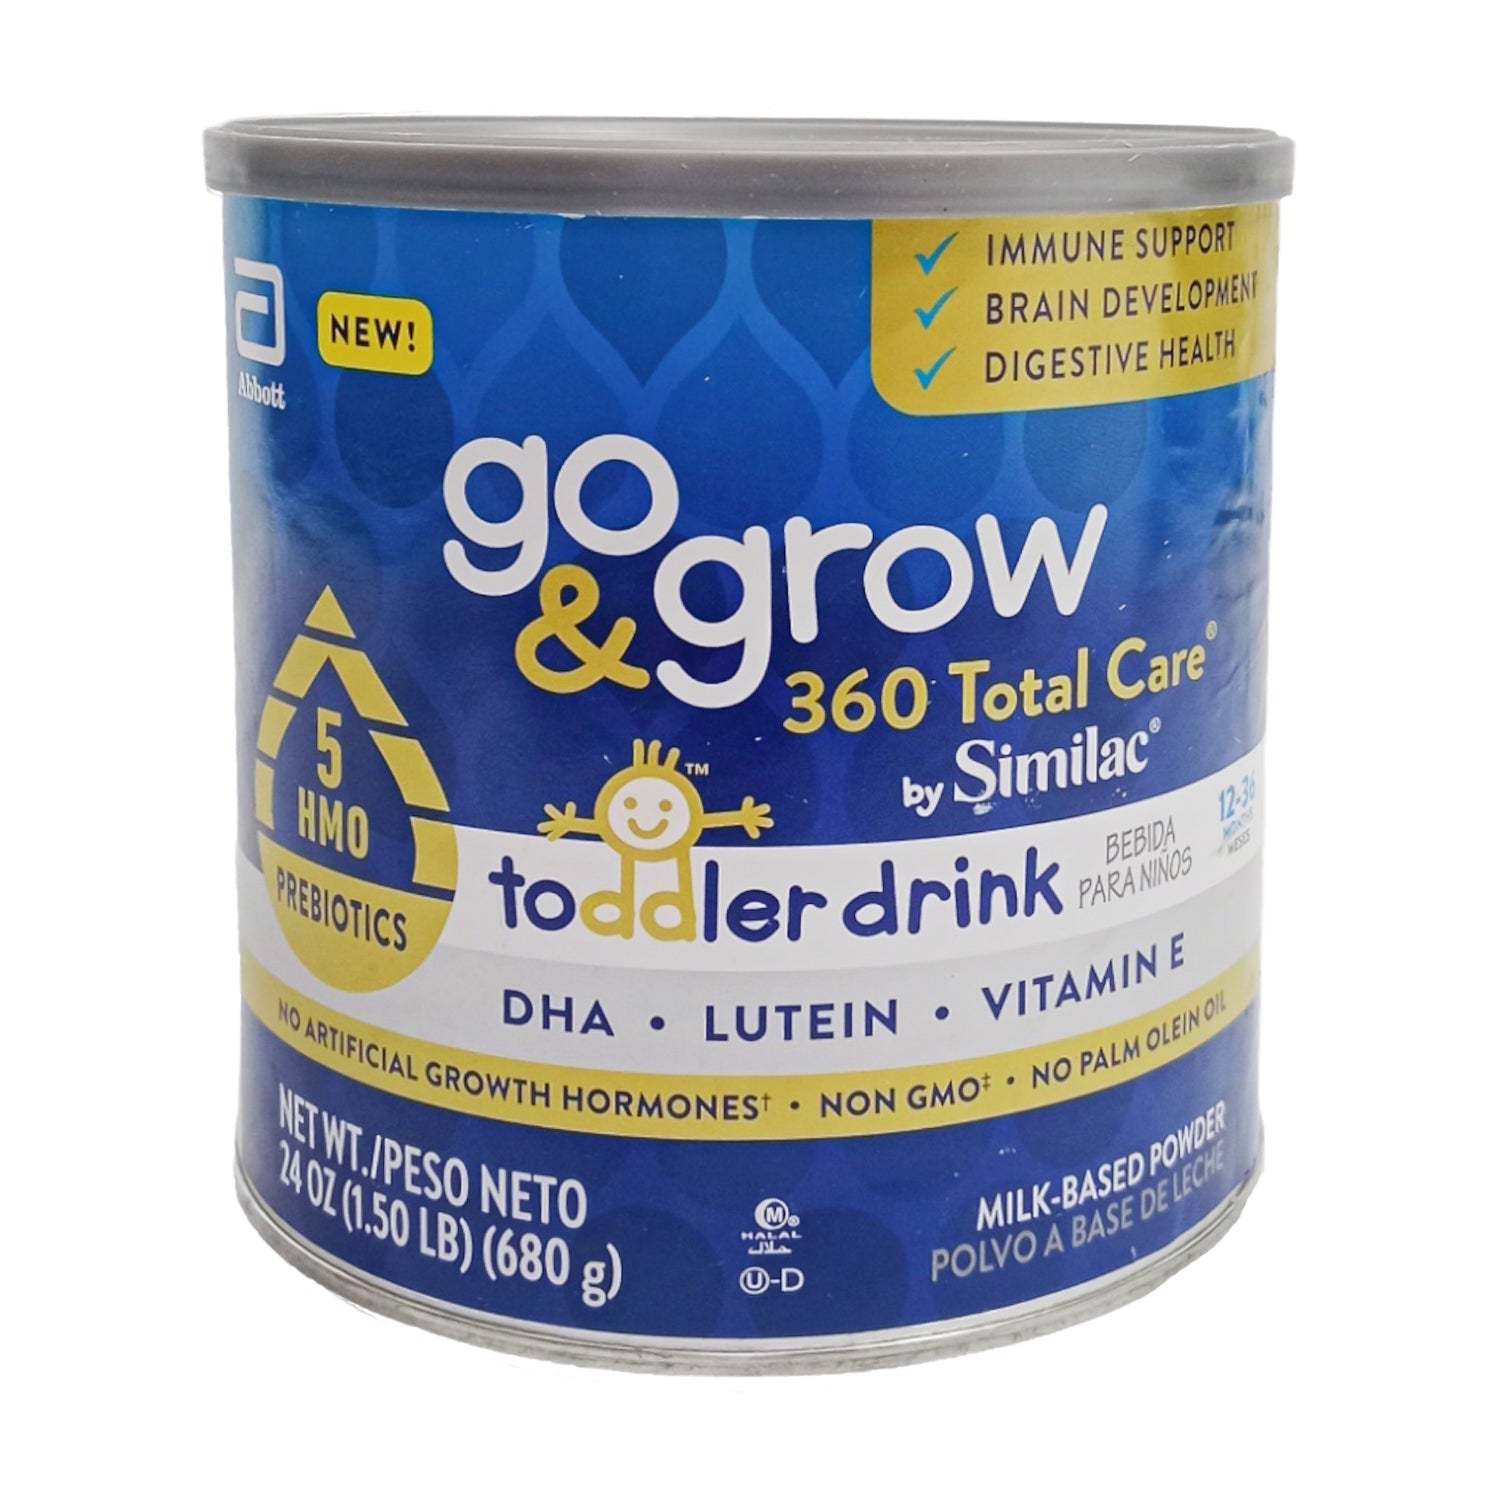 Similac Go & Grow 360 Total Care Todller Drink (12-36m) - 680g (24oz)